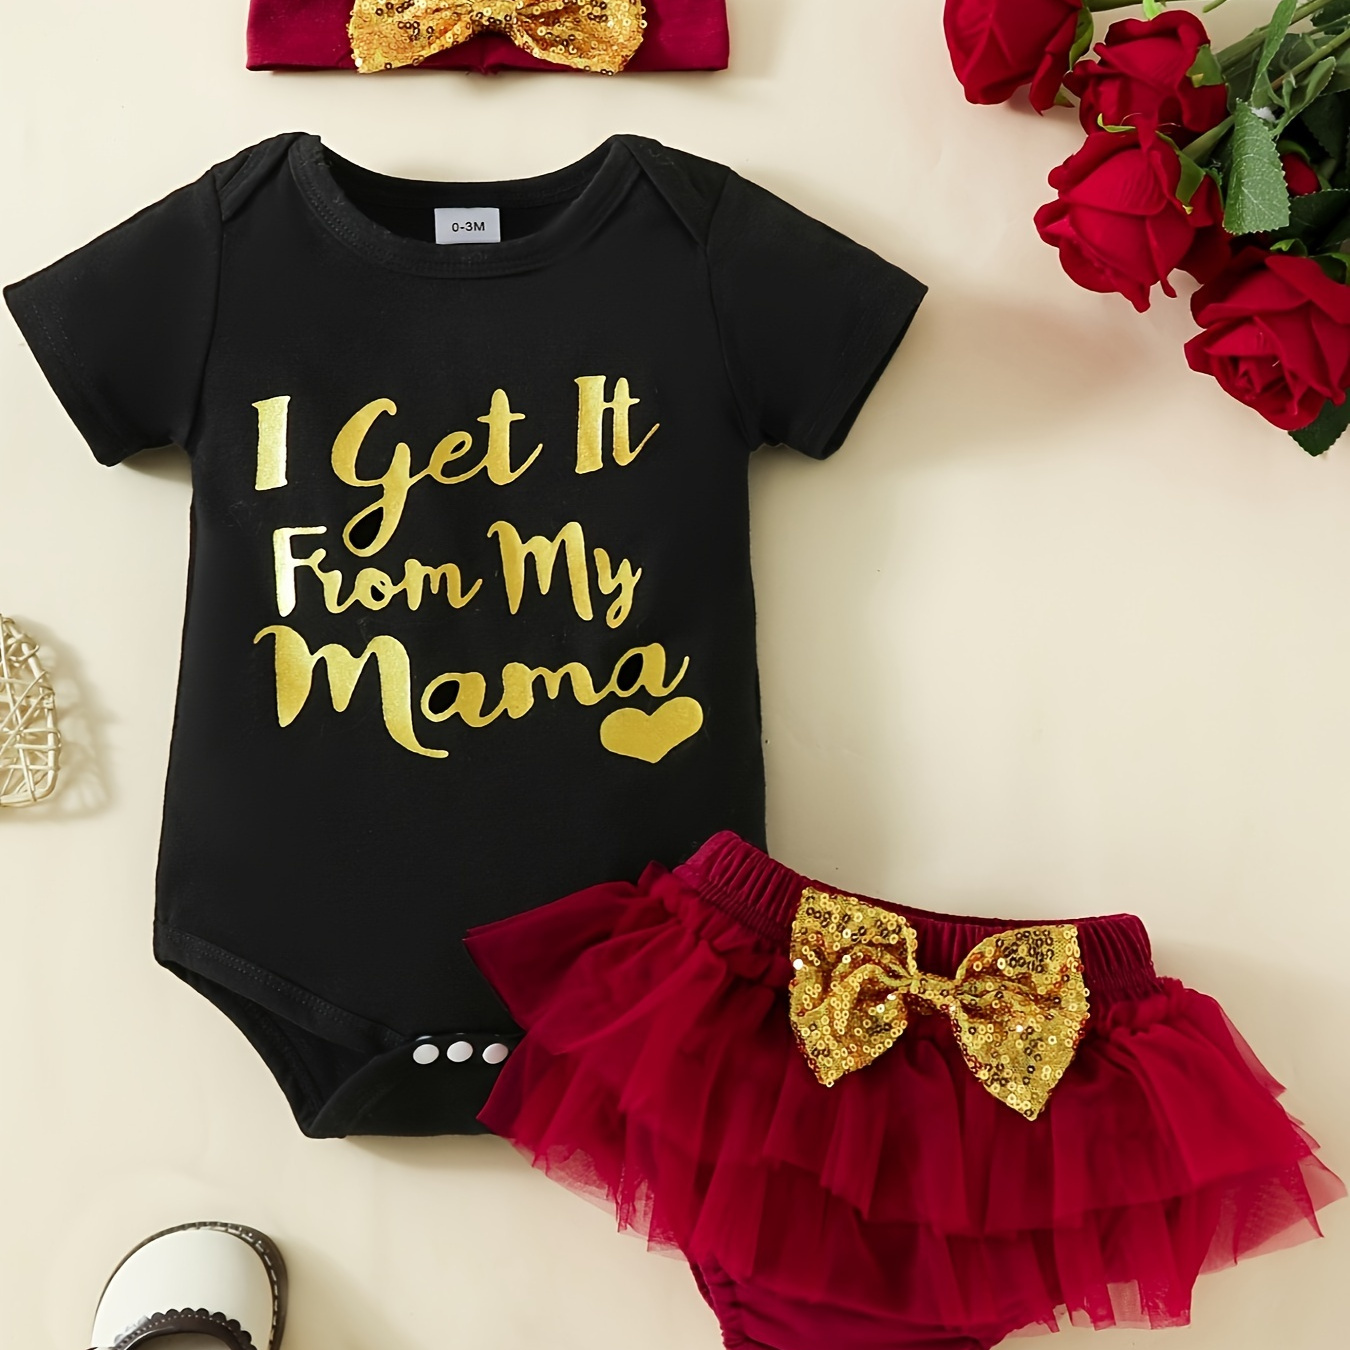 

2pcs Baby Girl's Casual Gold Sequin Design I Got Love From My Mom Letter Print Short-sleeved Triangle Romper + Golden Bow Red Short Mesh Skirt Suit With Headband Set